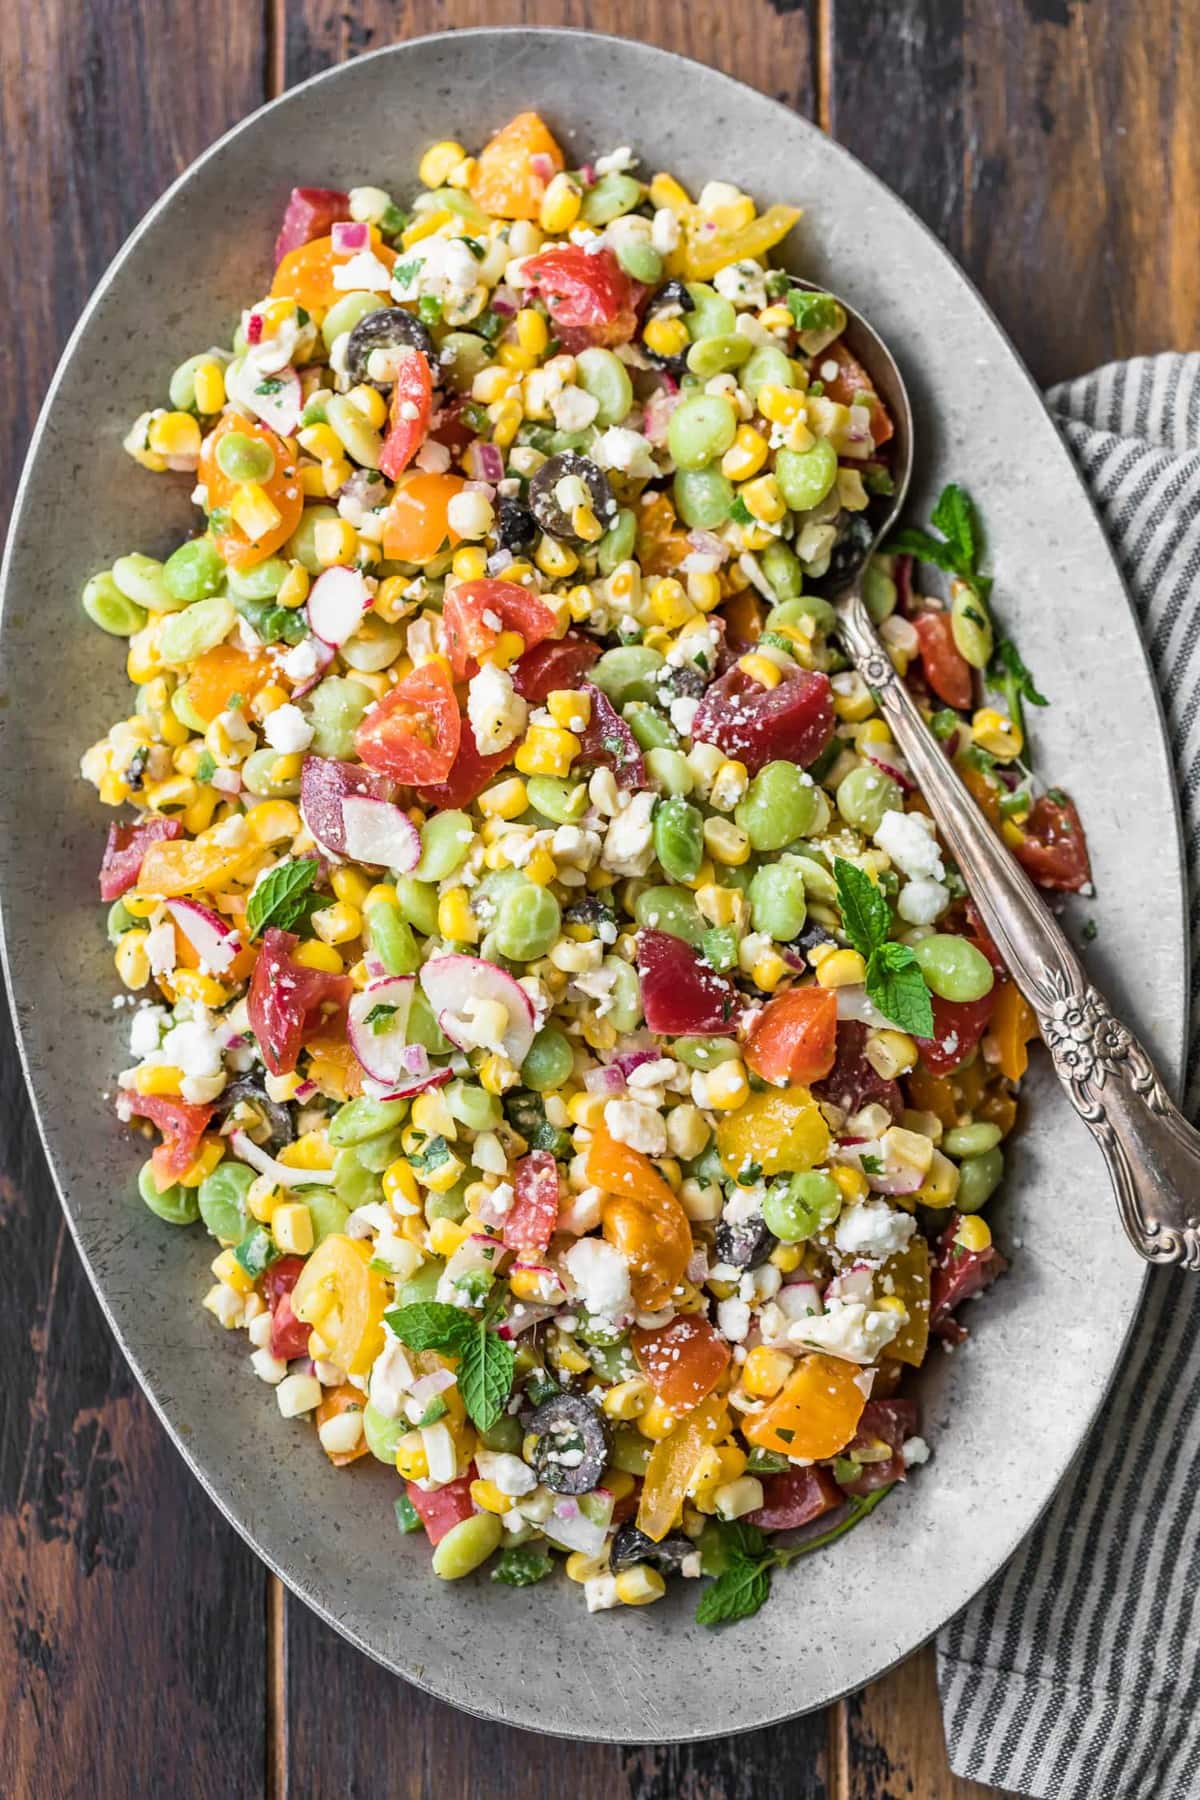 Top shot of a chopped salad on a large serving plate